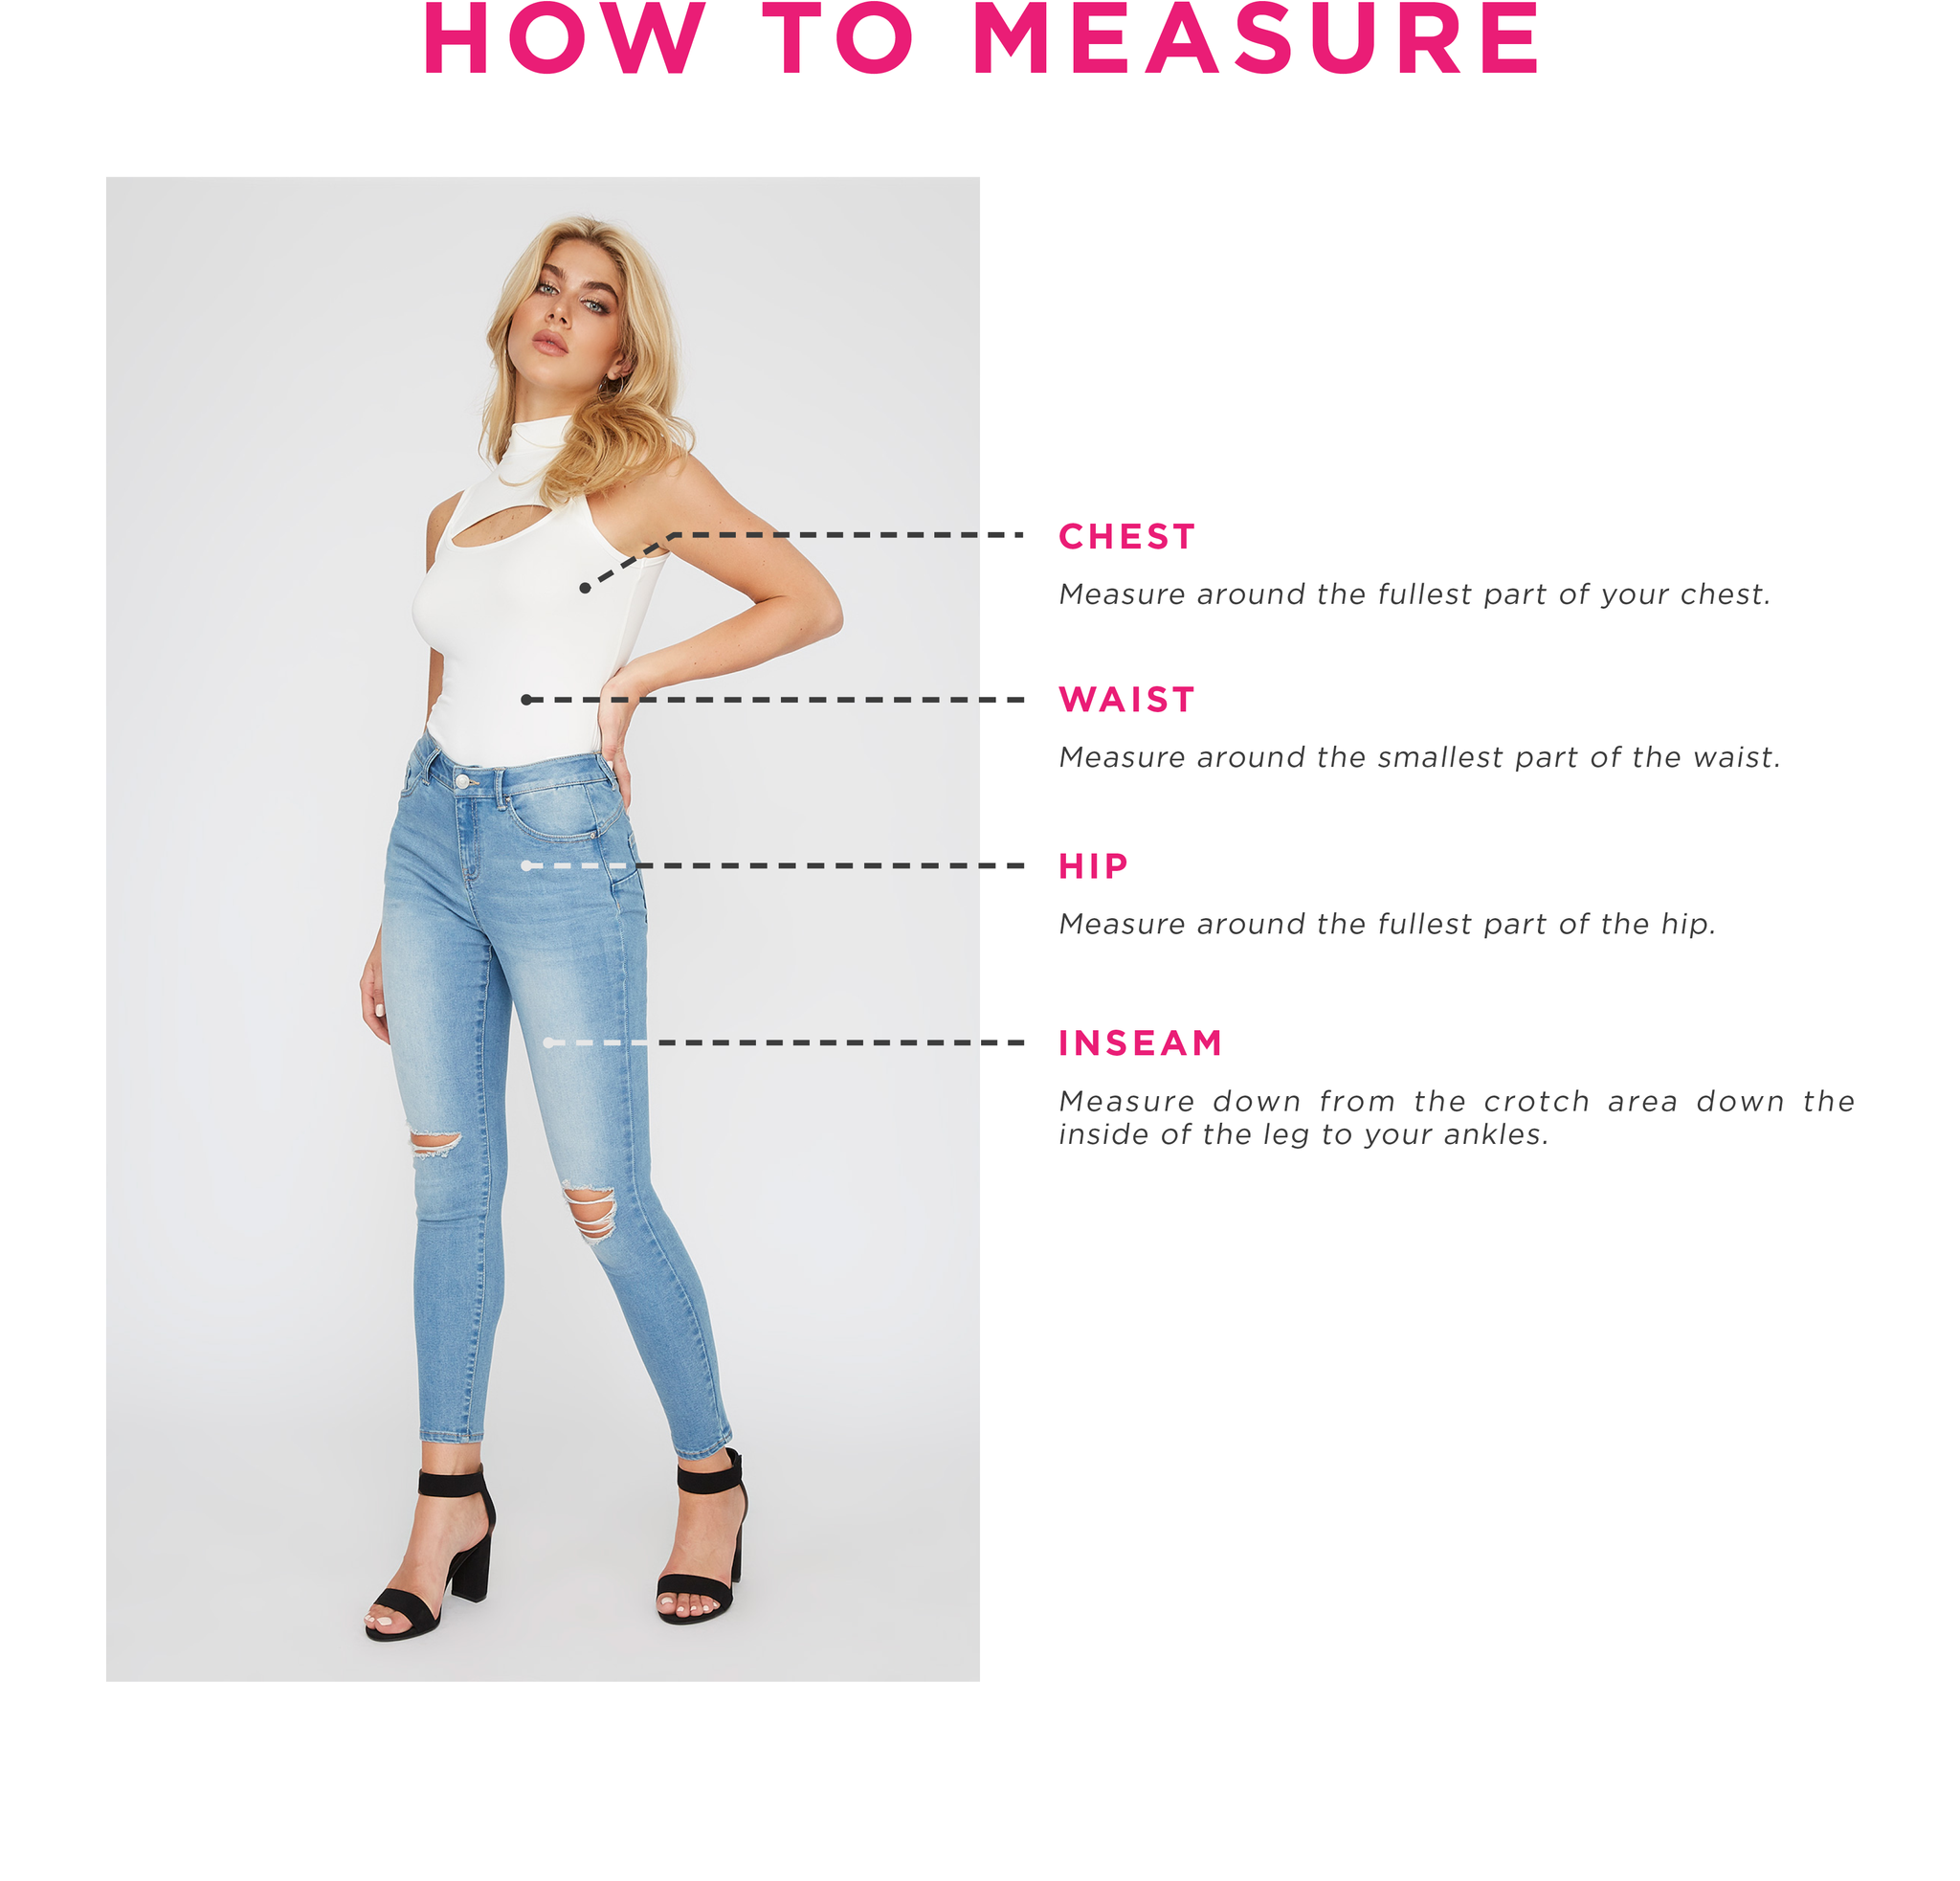 Charlotte Russe - How To Measure